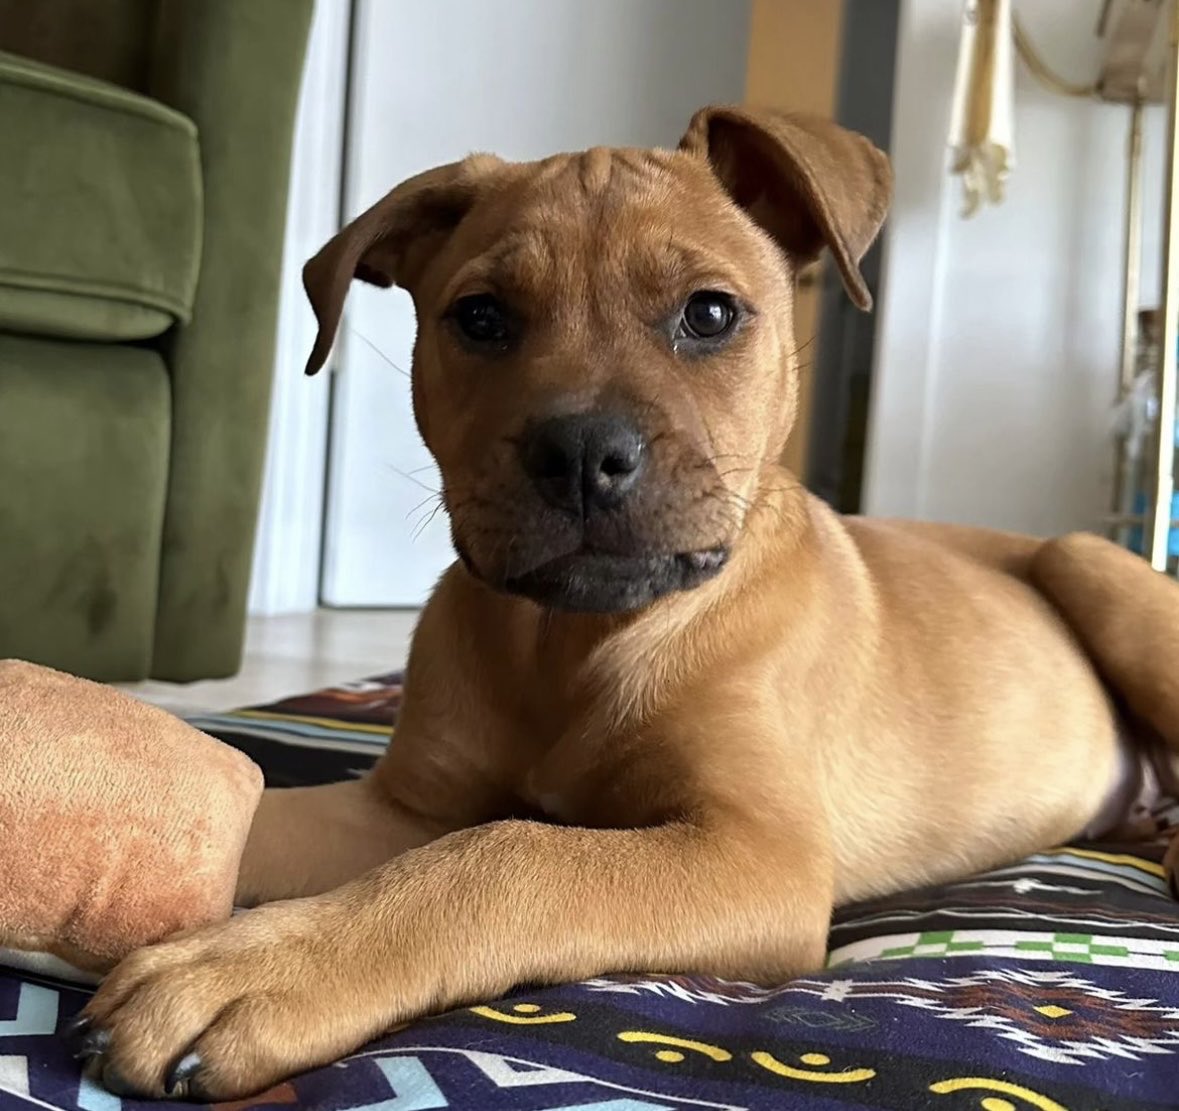 Gaspie is our 3 month old female pup! 💗🐾 DM us to adopt any of our available pets!#AnimalLoversRescue #rescuestory #animalrescue #adoptdontshop #rescue #animals #animallovers #animalsanctuary #animalrights #dogs #cats #rescuedog #kittenrescue #fosteringsaveslives #adoptme